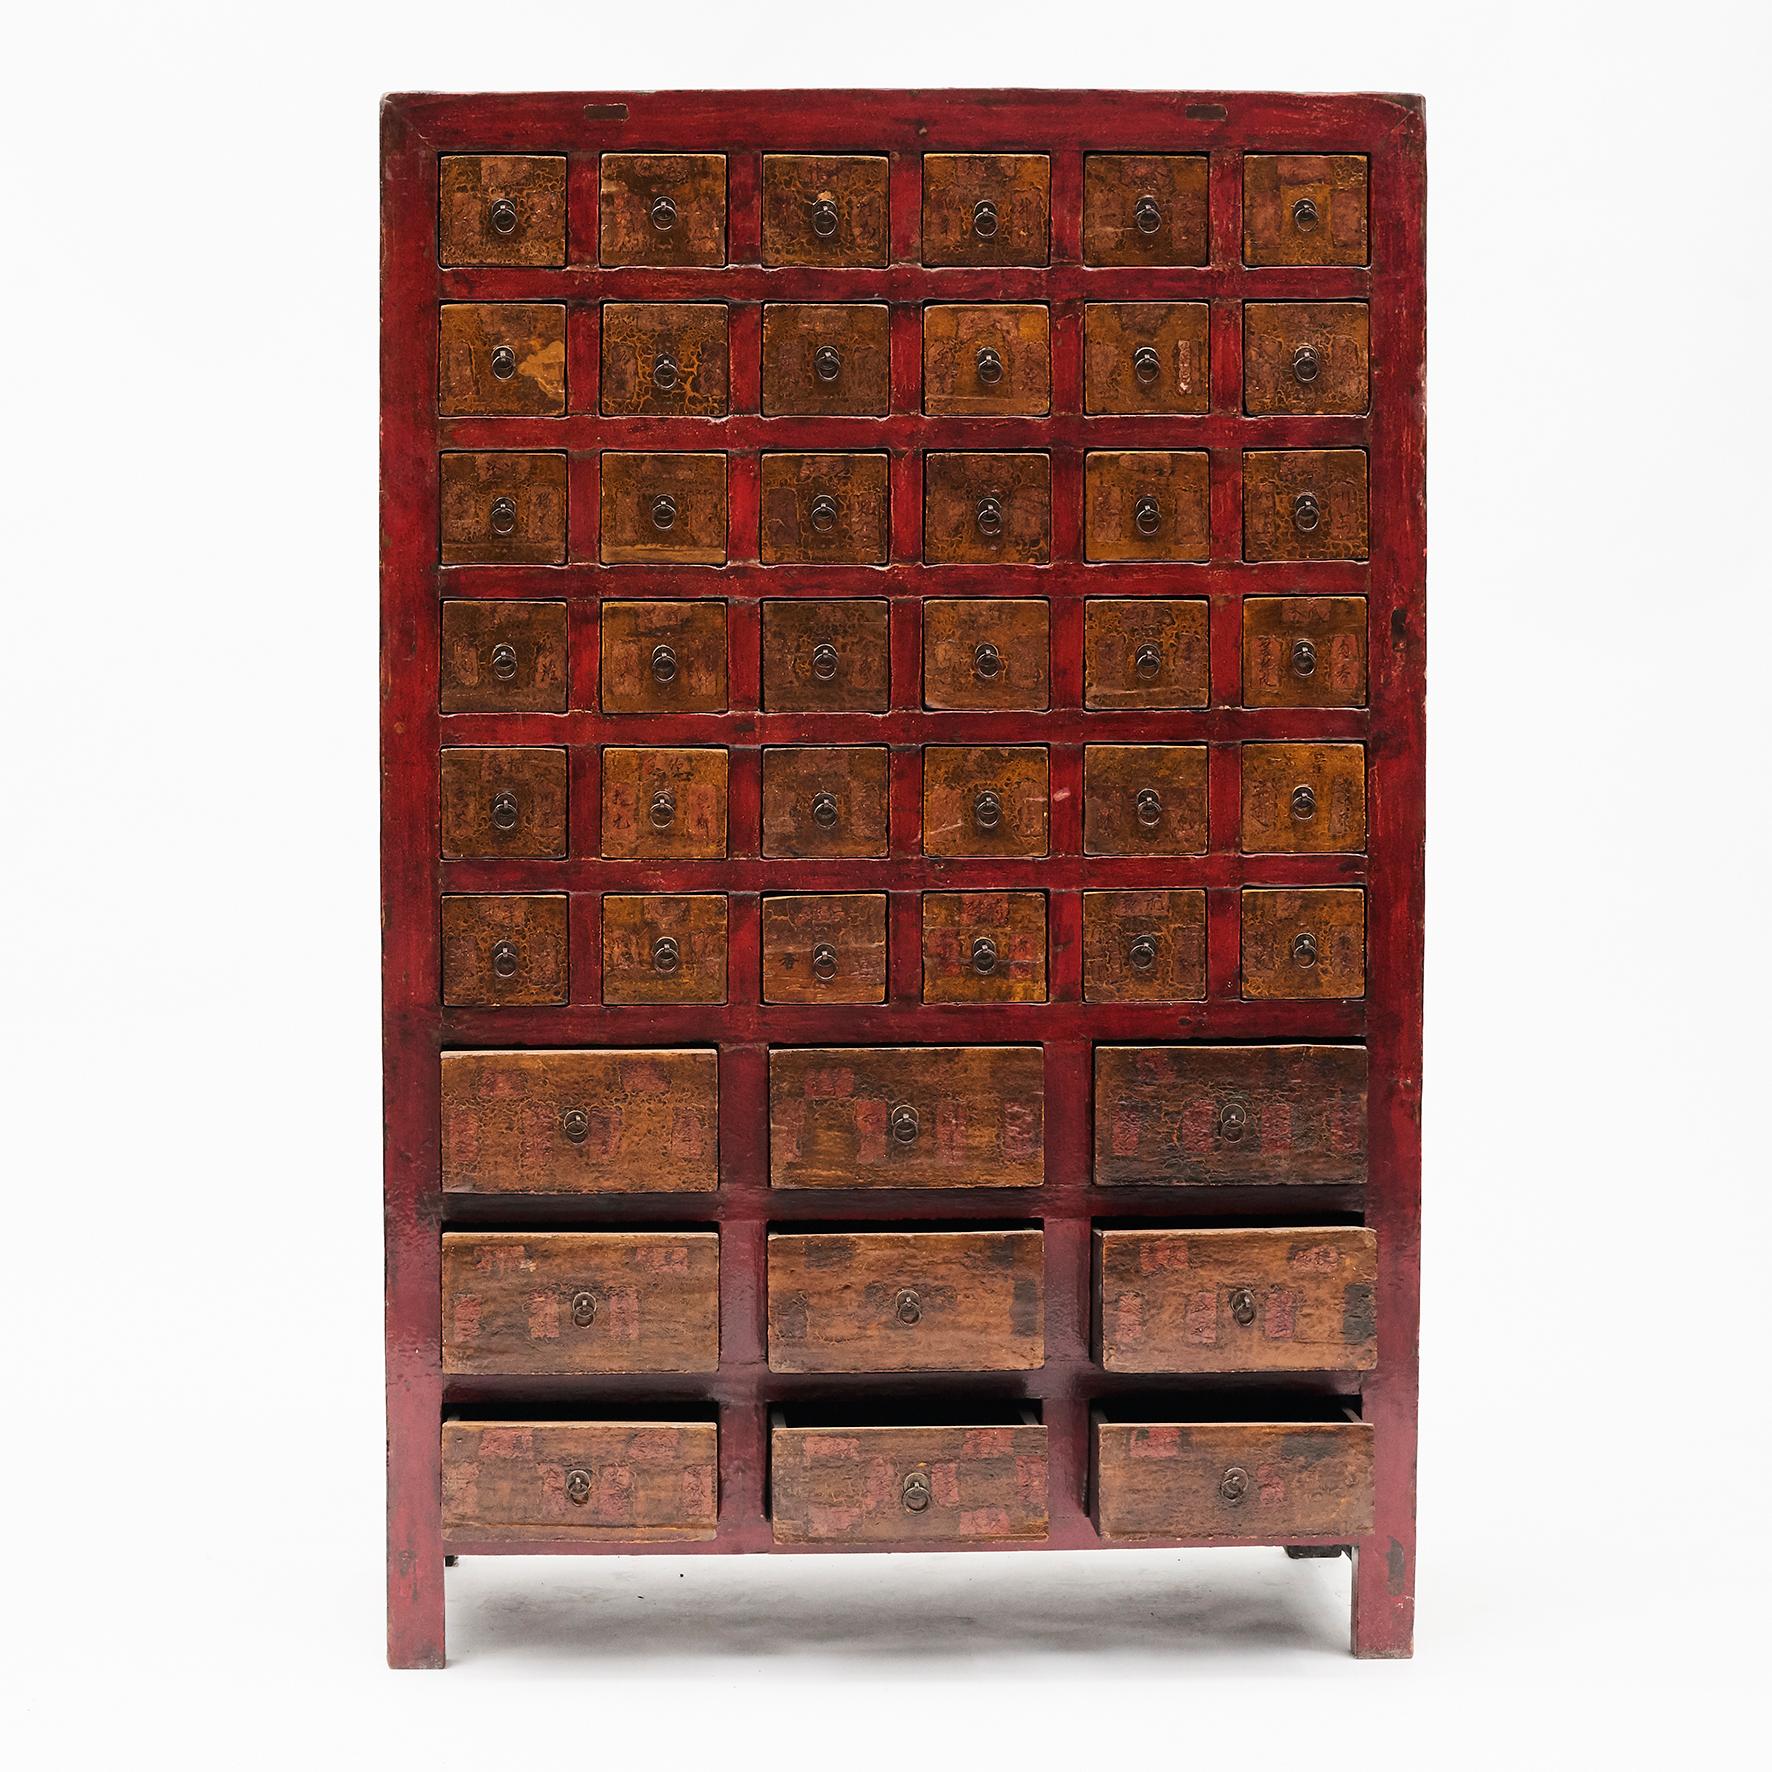 Beautiful Chinese apothecary medicine chests dating to circa 1840-1860 from the Shanxi province, China. 
45 drawers and original lacquer. Drawers still with some remains of the descriptions with the name of different medicinal herbs.

Previously